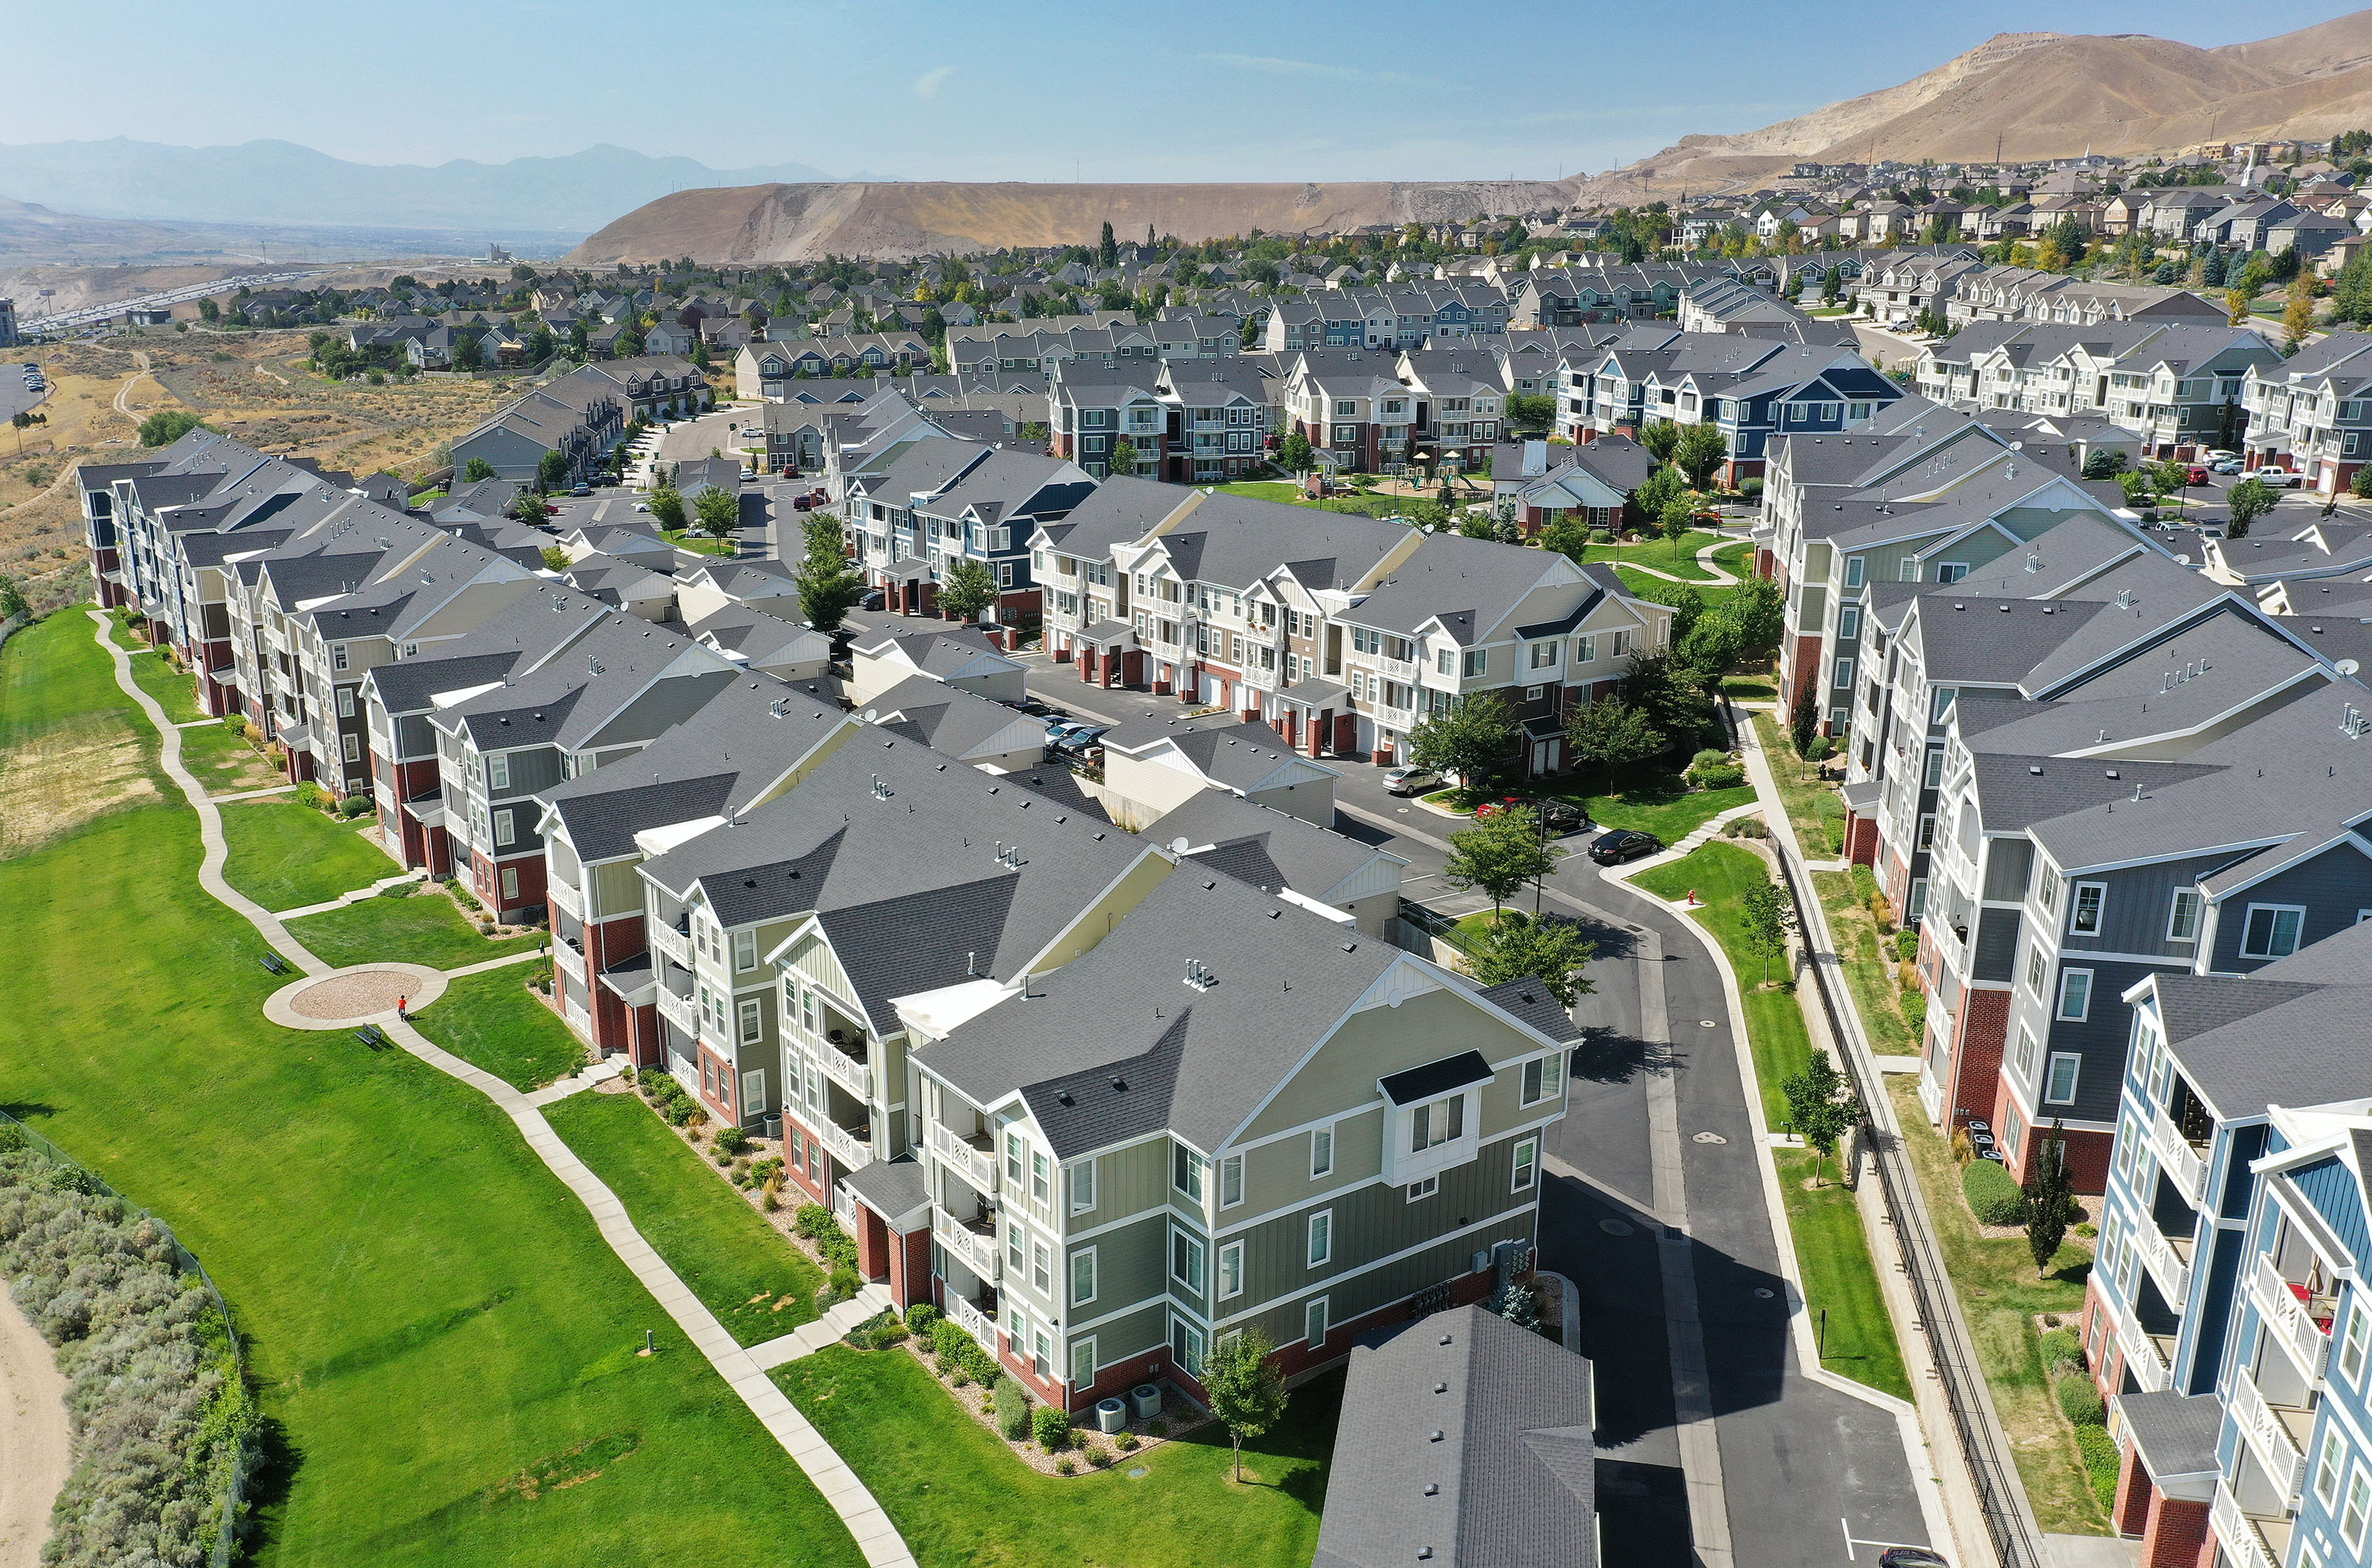 Apartments and town houses on Traverse Mountain Boulevard in Lehi are pictured on Aug. 11, 2021.